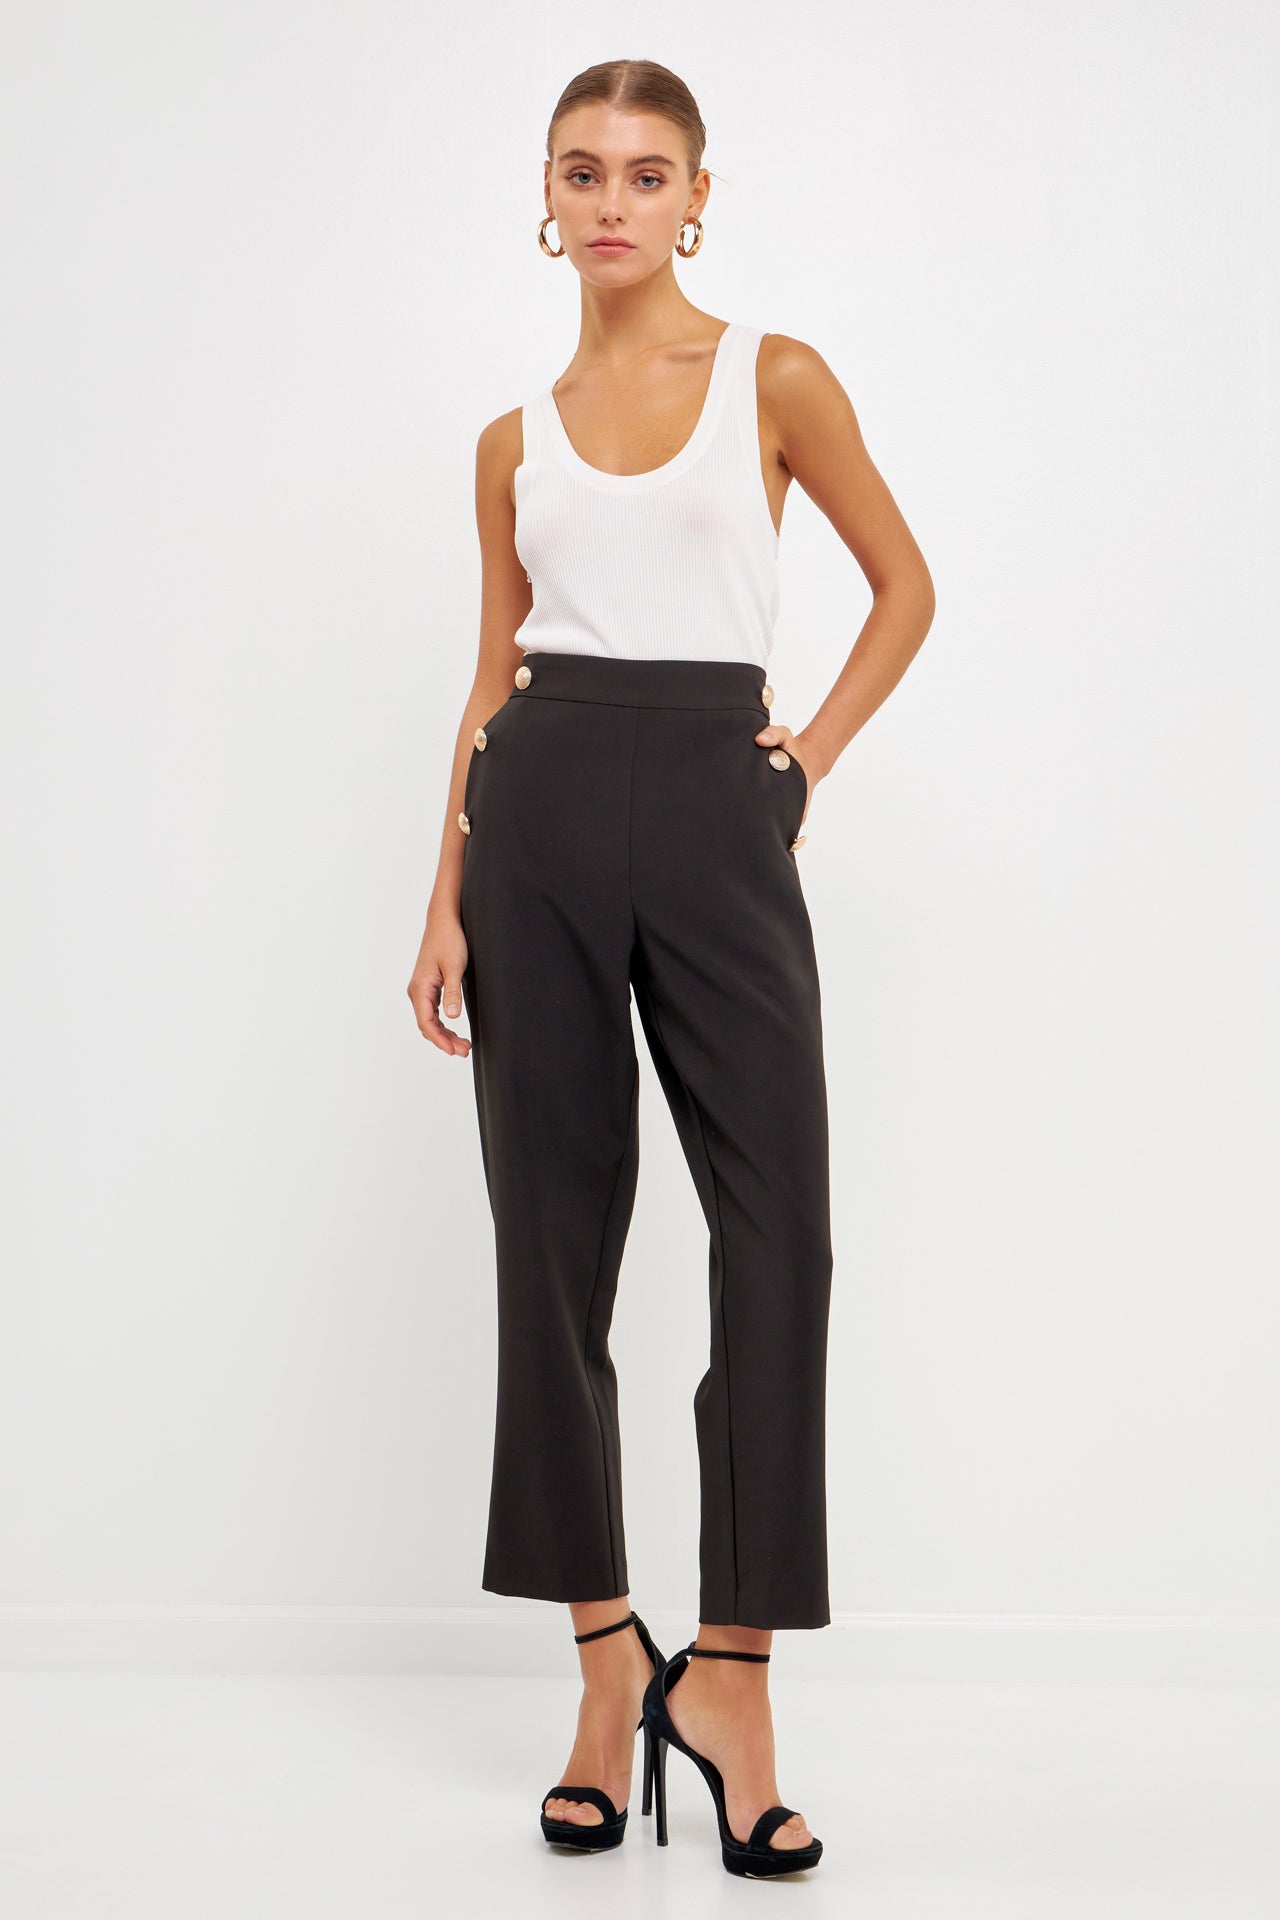 Endless Rose - High Waisted Buttoned Trousers - Pants in Women's Clothing available at endlessrose.com